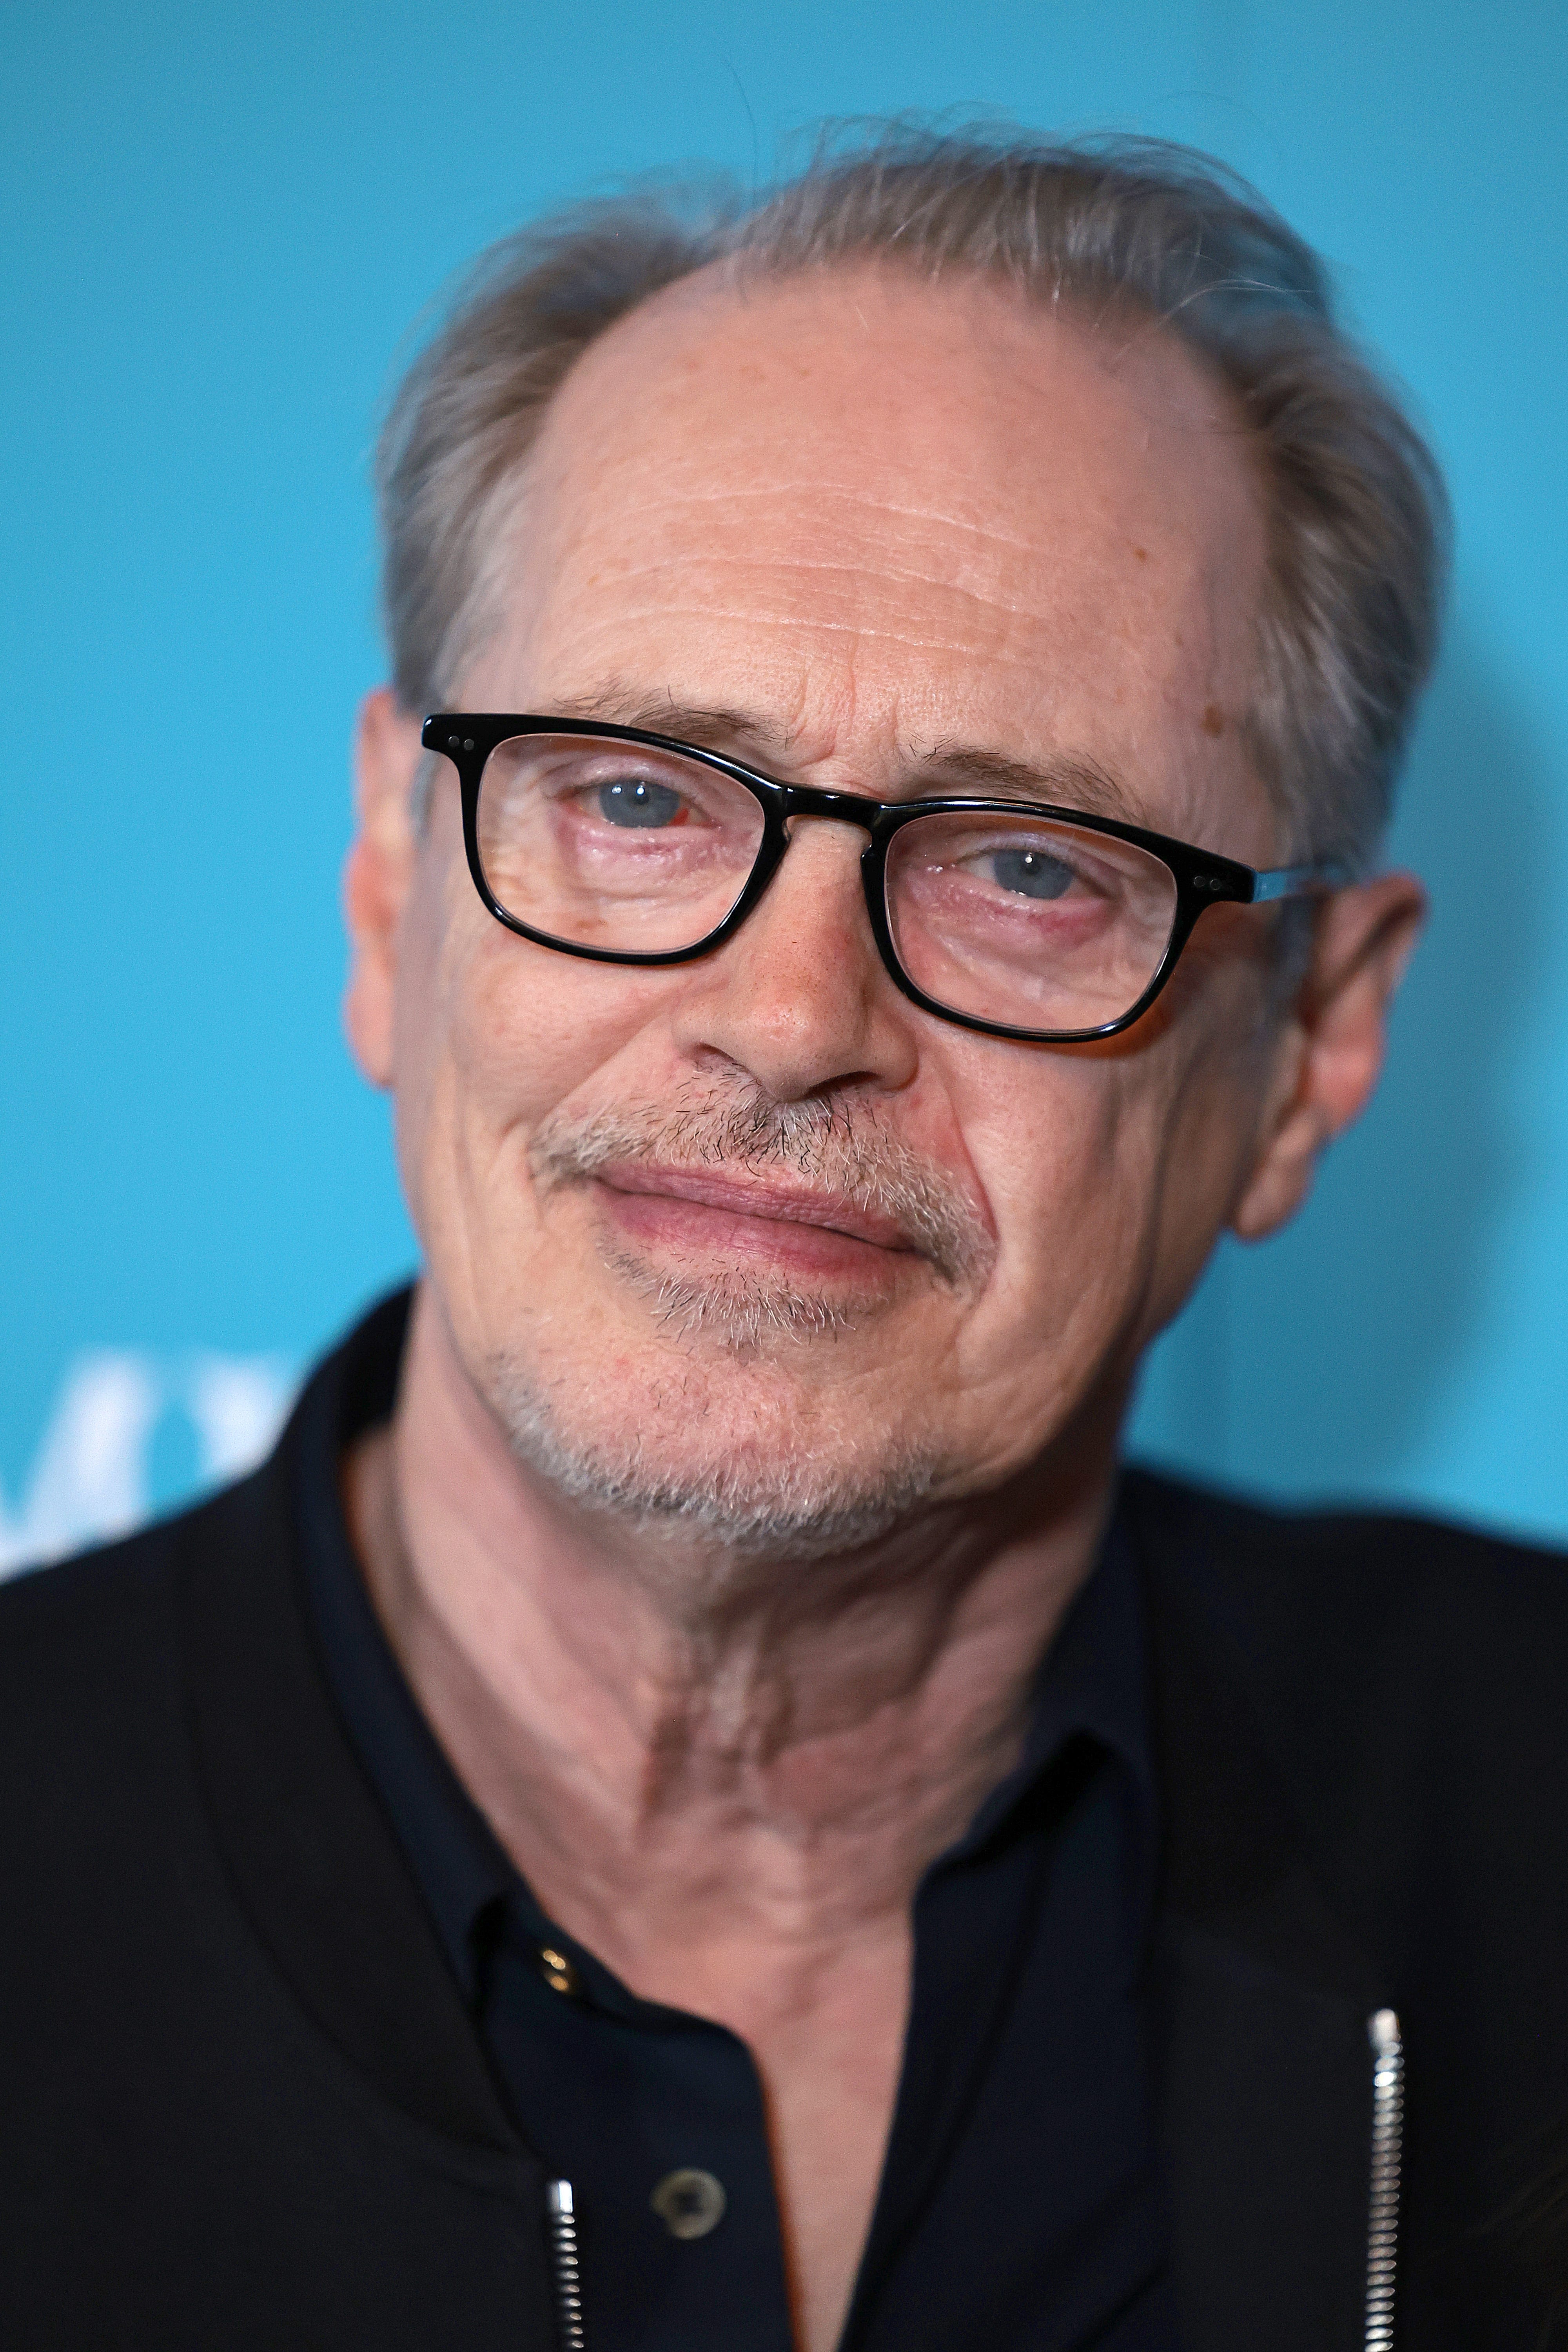 Steve Buscemi is 'OK' after actor was attacked during walk in New York City